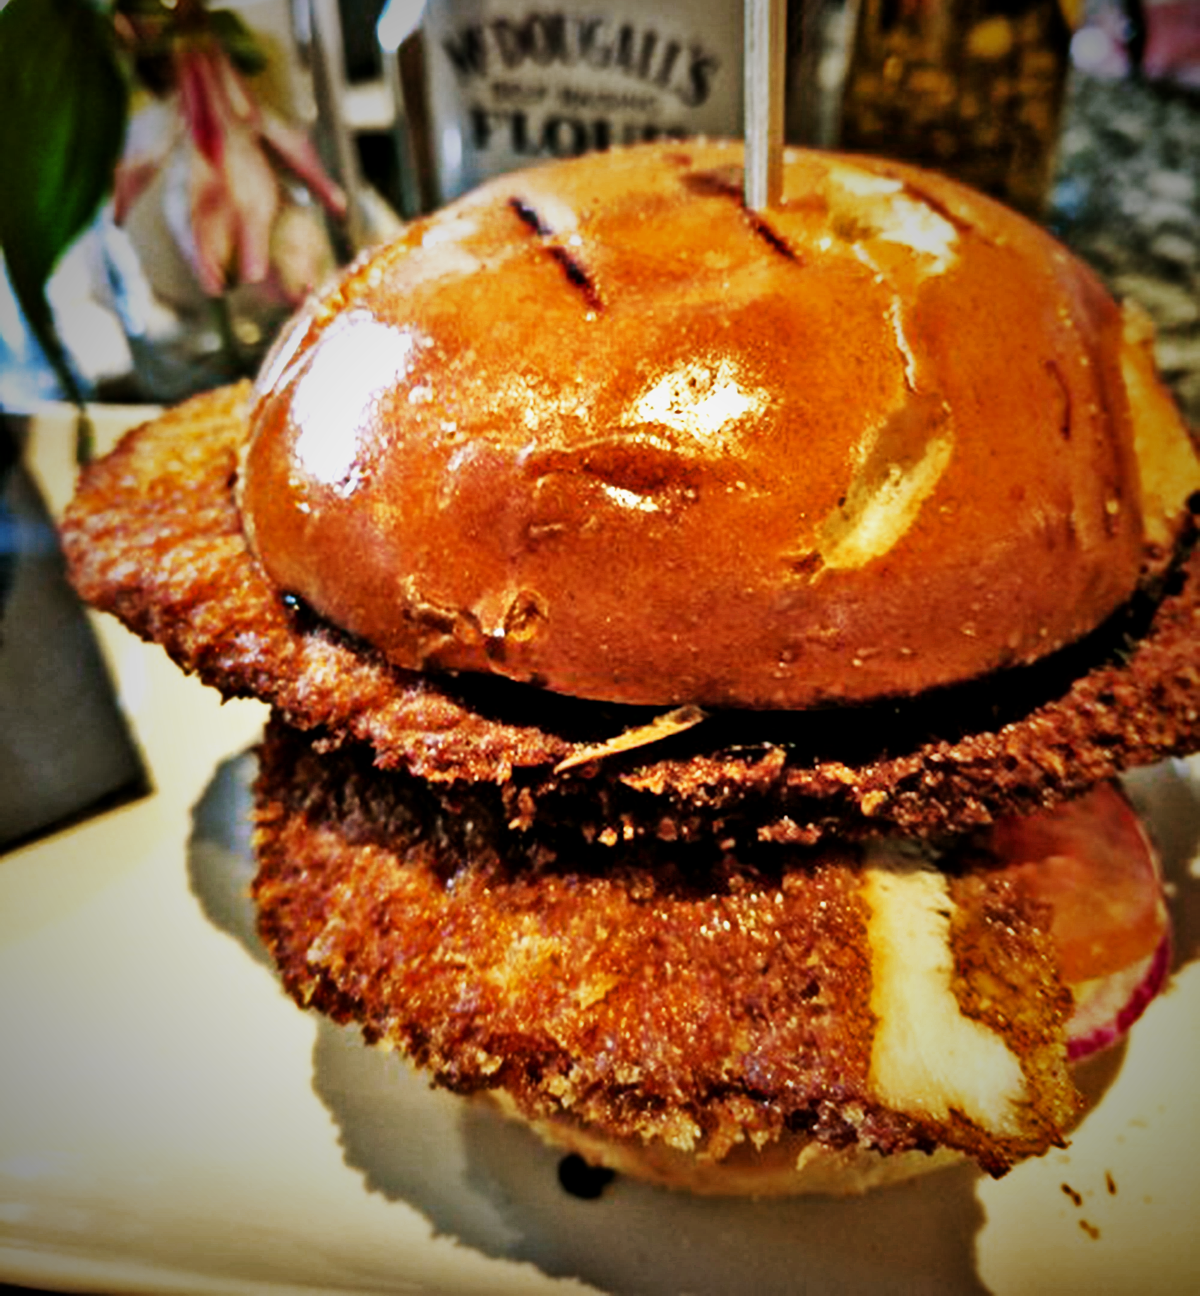 Prince-of-Wales, Worldwide Chicken Burger Appreciation Society, Chicken Burger Review Food Critic HolyCluck Holy Cluck Sandwich Chook Eran Thomson